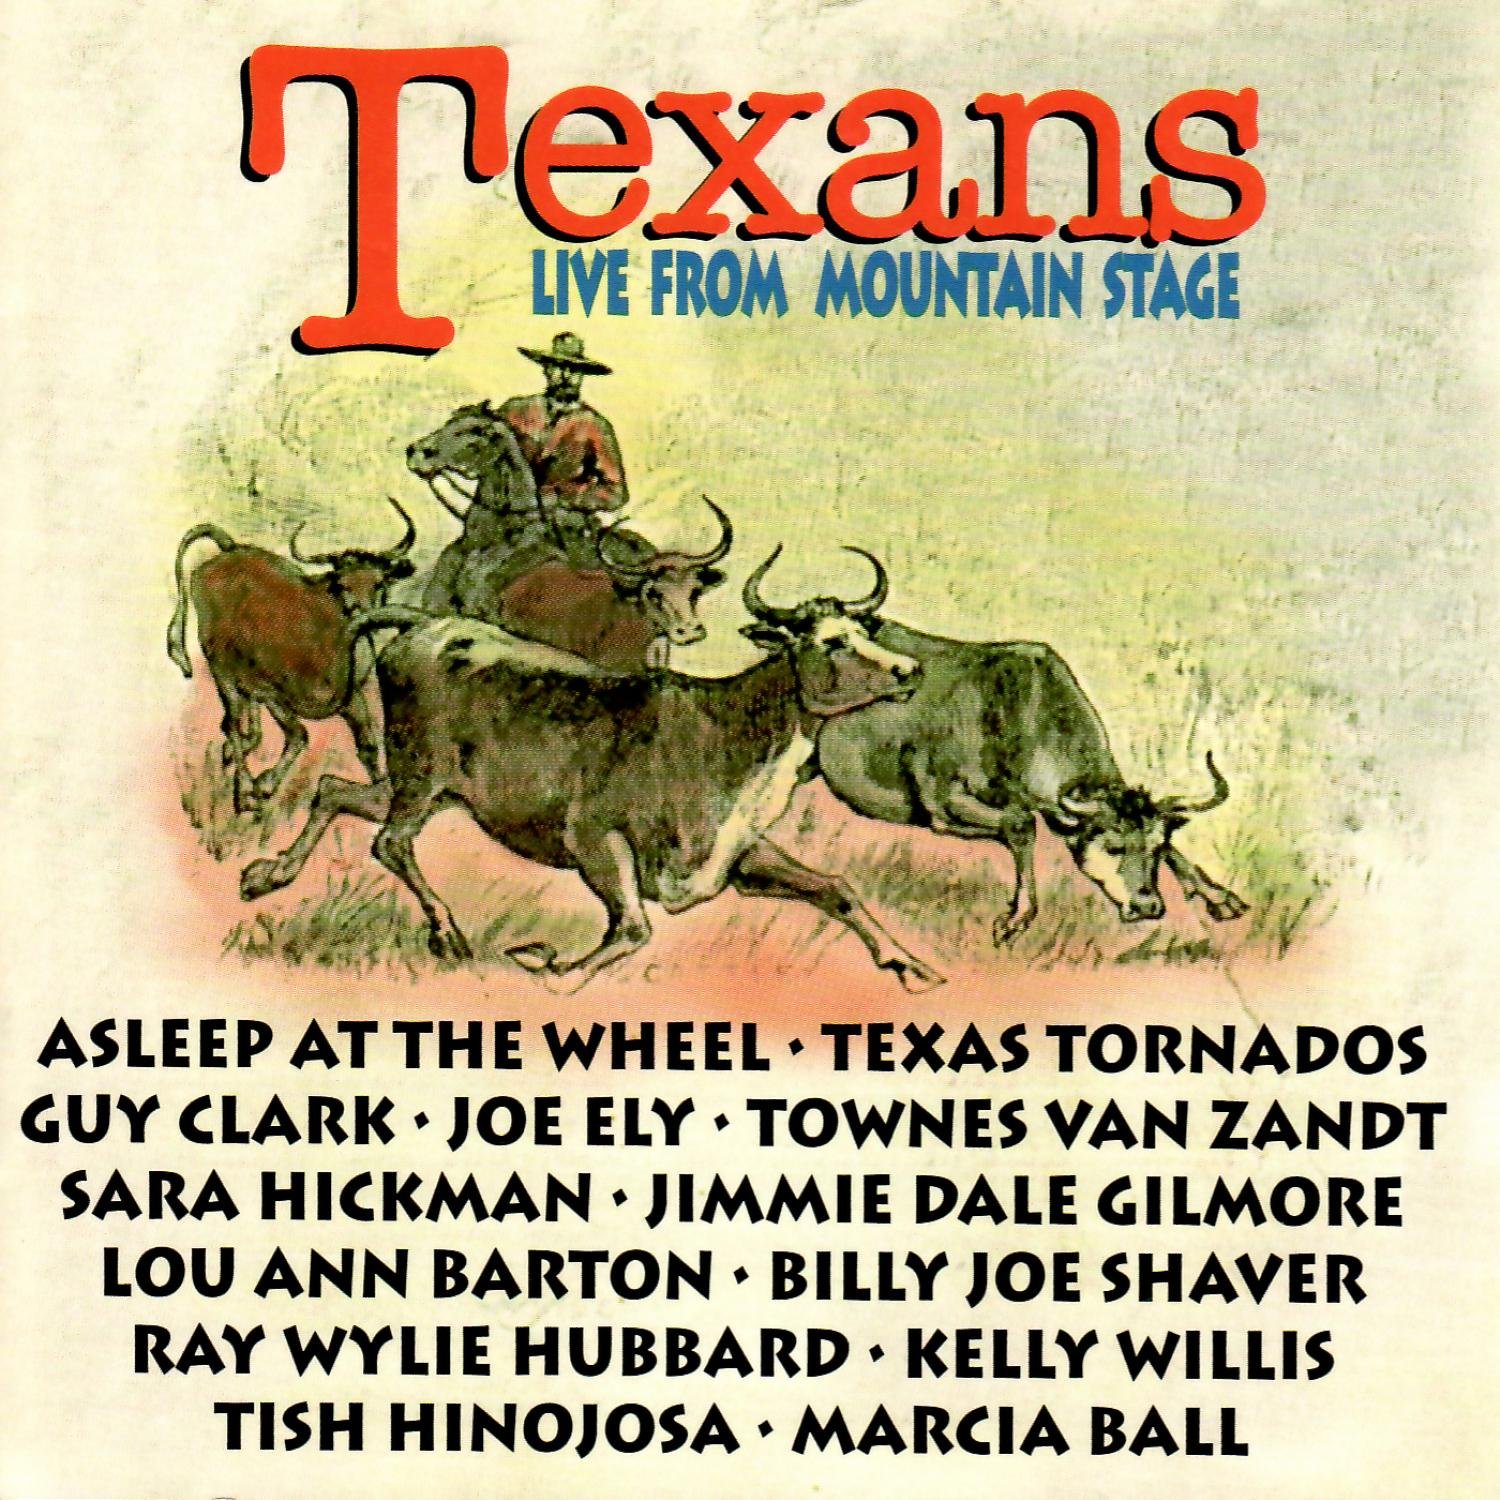 Texans Live from Mountain Stage